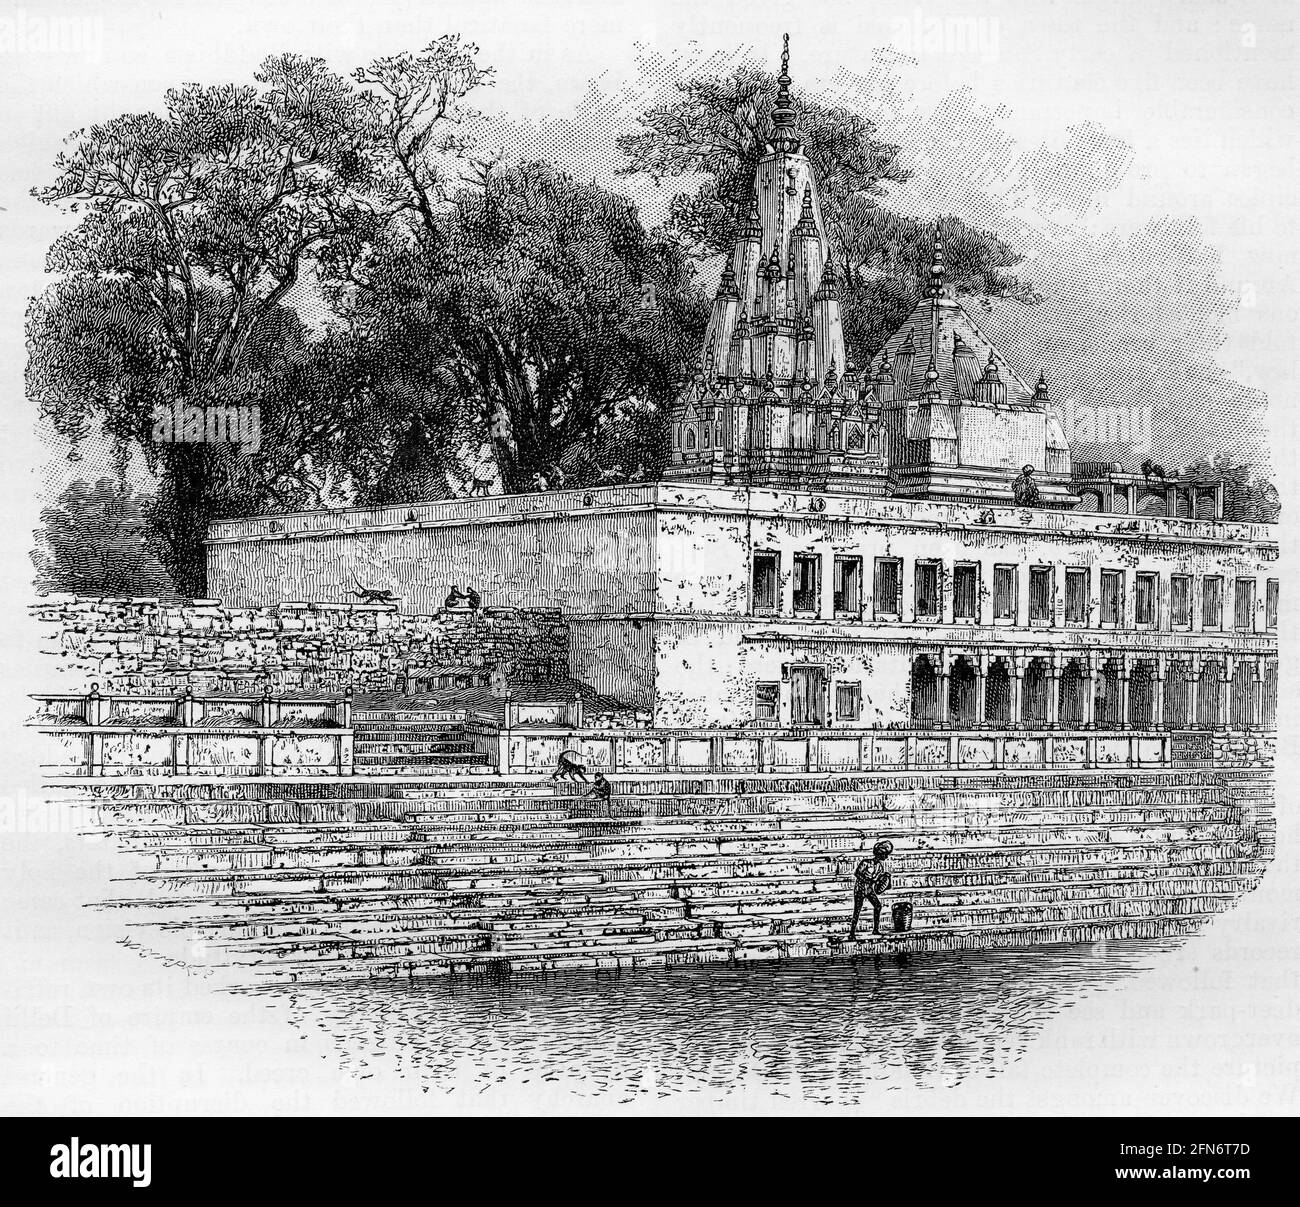 Engraving of the Monkeys' temple, Benares, India, circa 1890 . Also known as Varanasi, the city on the banks of the Ganges in Uttar Pradesh, is a major religious hub in India, as it is the holiest of the seven sacred cities (Sapta Puri) in Hinduism and Jainism. Stock Photo